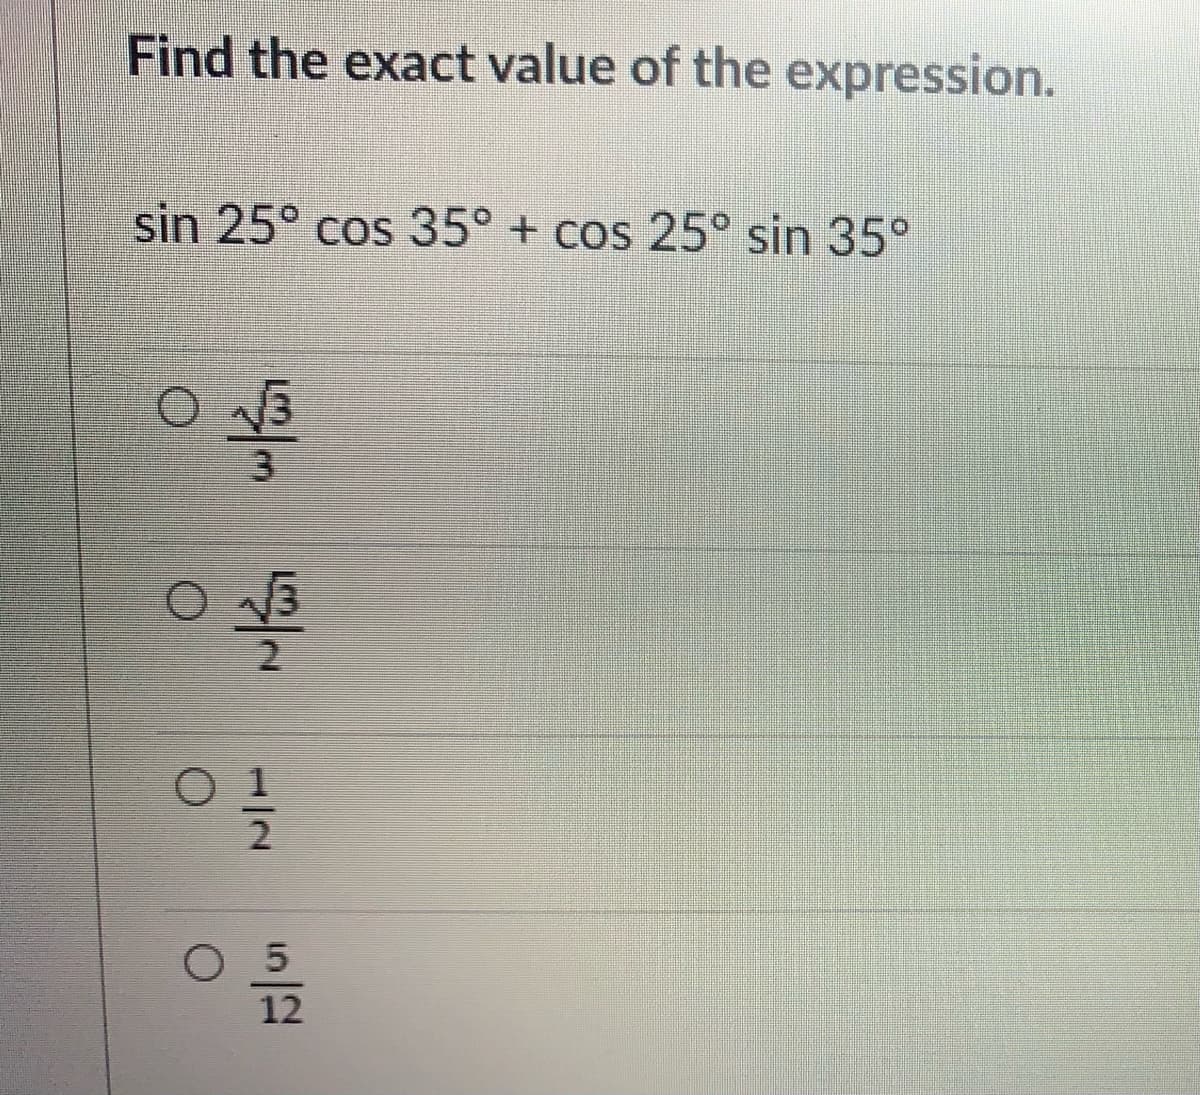 Find the exact value of the expression.
sin 25° cos 35° + cos 25° sin 35°
3.
O 5
12
1/2
